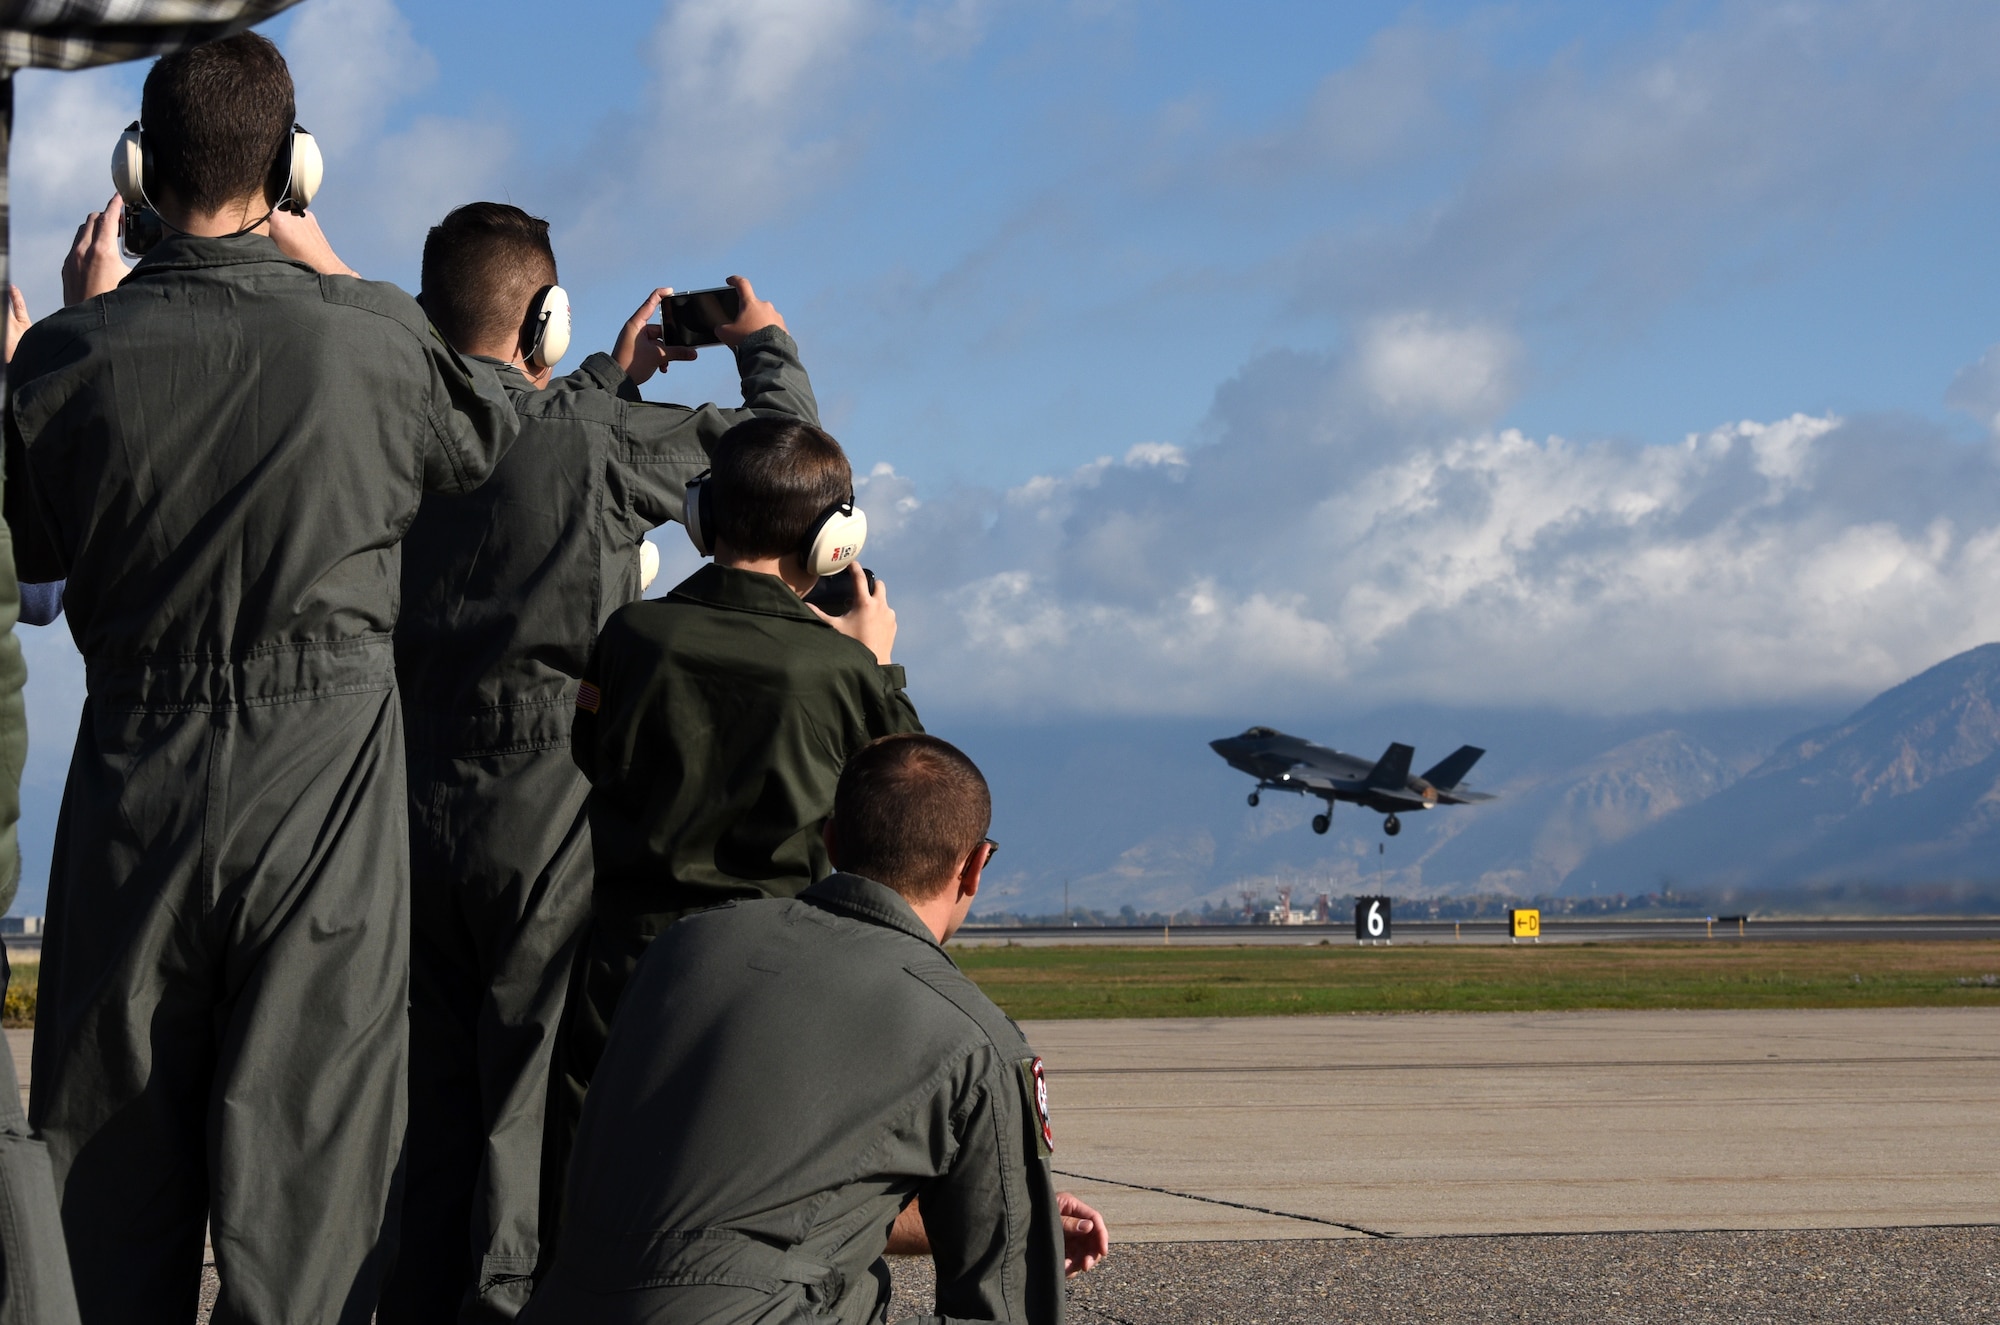 Children with Make-A-Wish Utah watch as an F-35A Lightning II takes off from Hill Air Force Base, Utah. The children visited the 388th Fighter Wing where they spent the day learning what it's like to be a pilot. They received flight suits, name tapes, patches, and wings. (U.S. Air Force photo by Micah Garbarino)